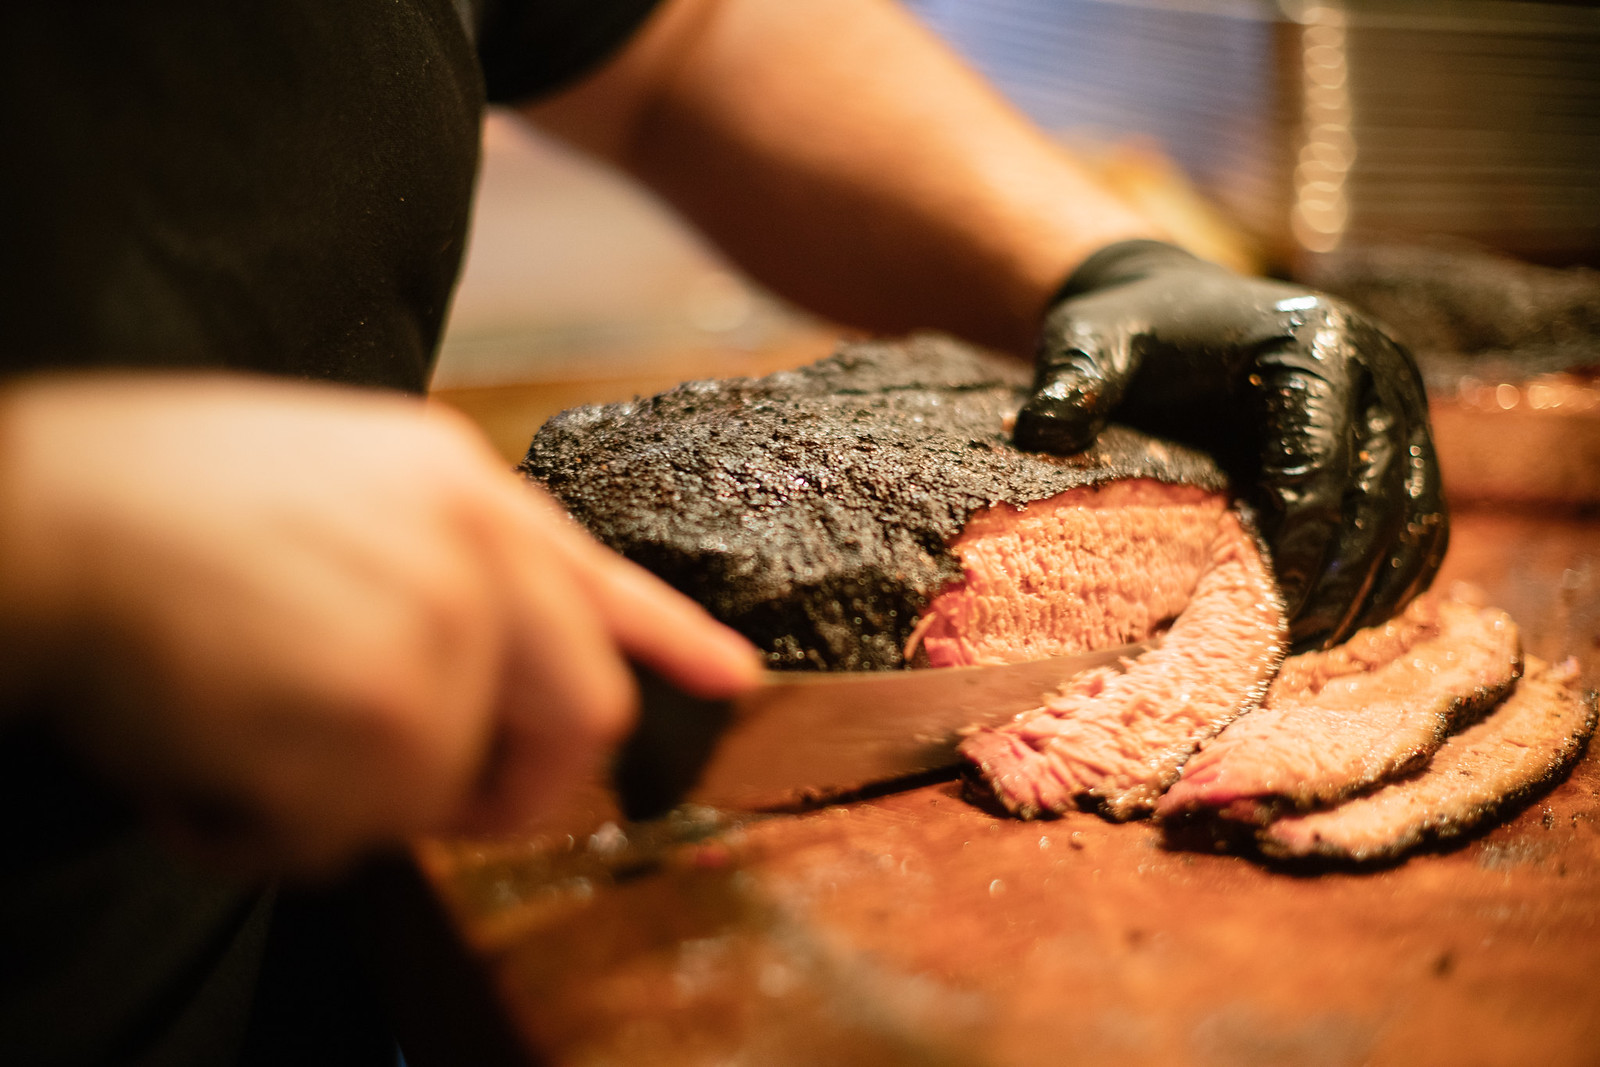 A chef holds down a slab of brisket and slices it into thin pieces.